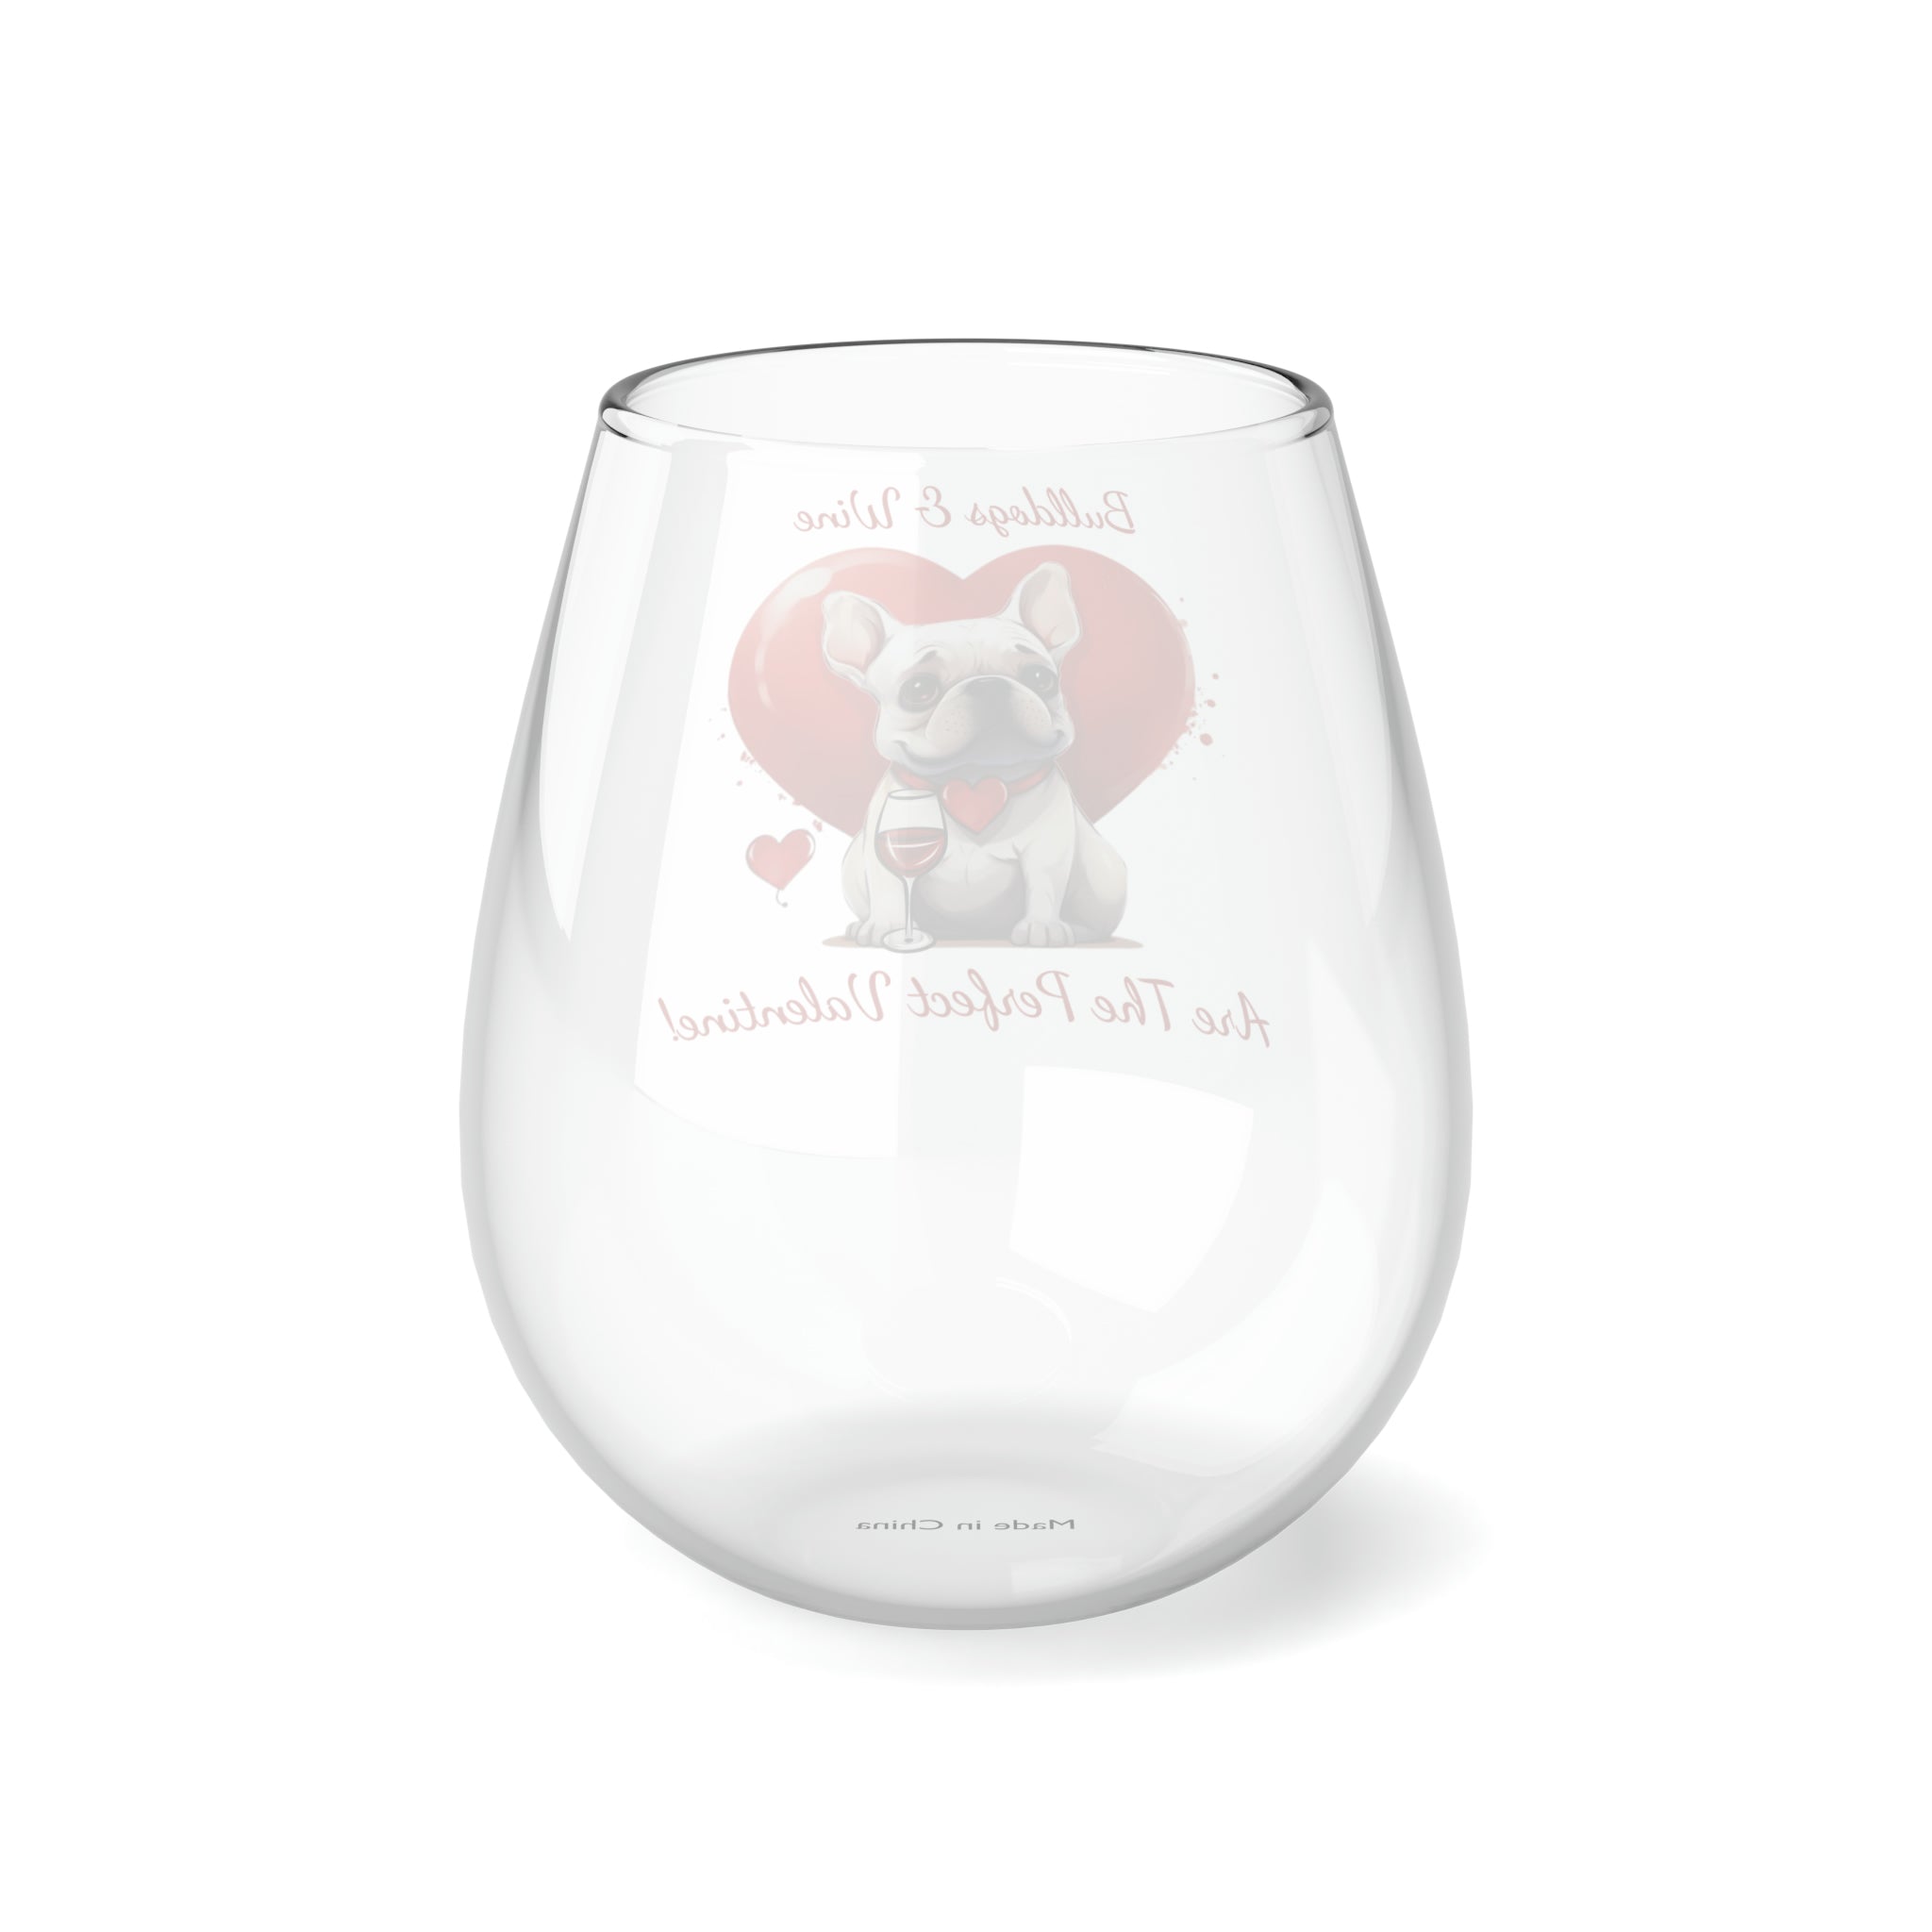 Bulldogs & Wine Are the Perfect Valentine! Stemless Wine Glass - White French